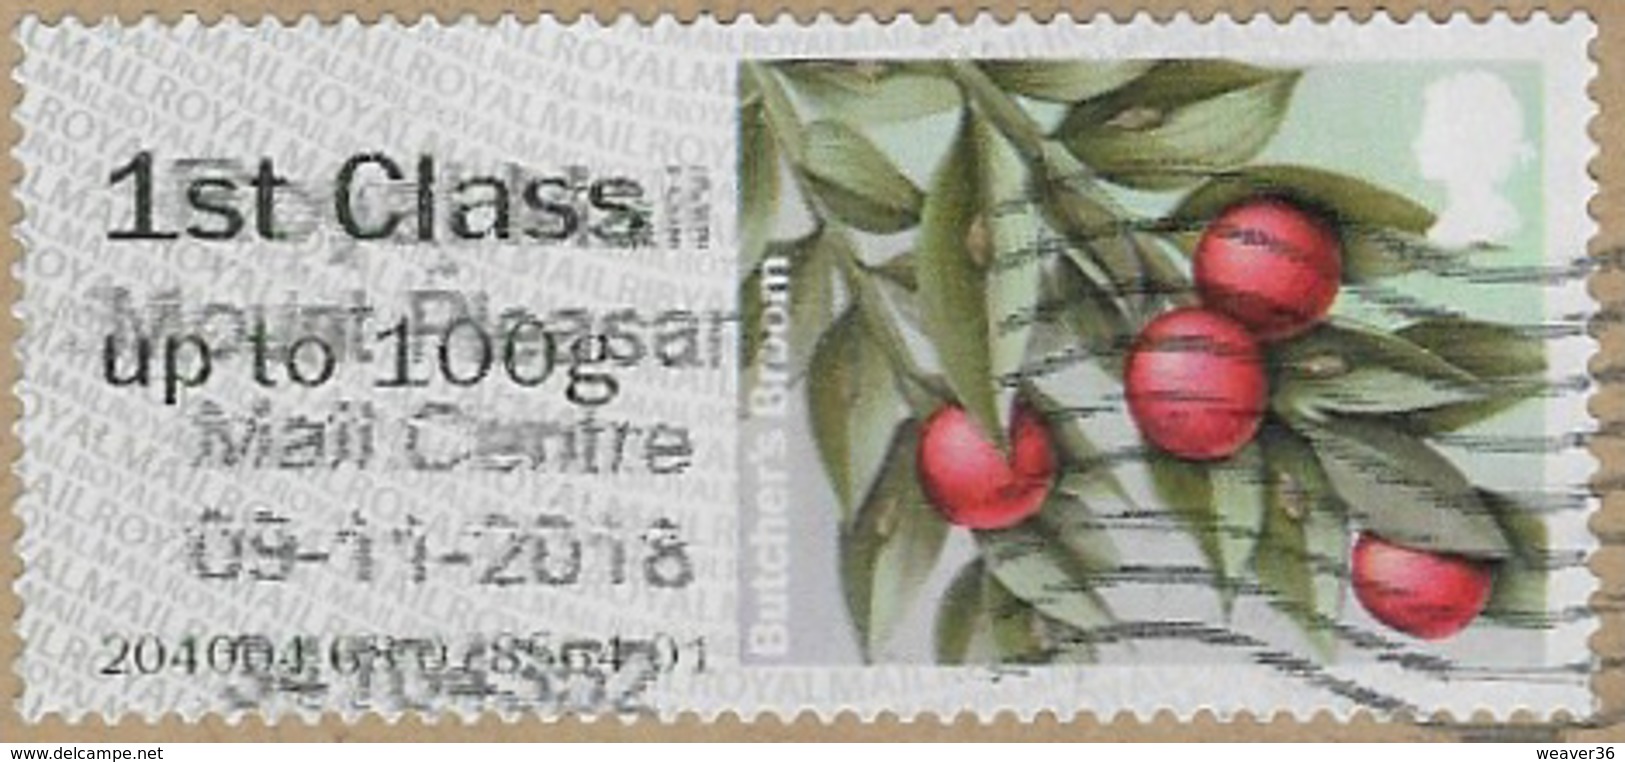 GB 2014 Winter Greenery 1st Type 4 Used Issuing Office 204004 [32/173/ND] - Post & Go (automatenmarken)